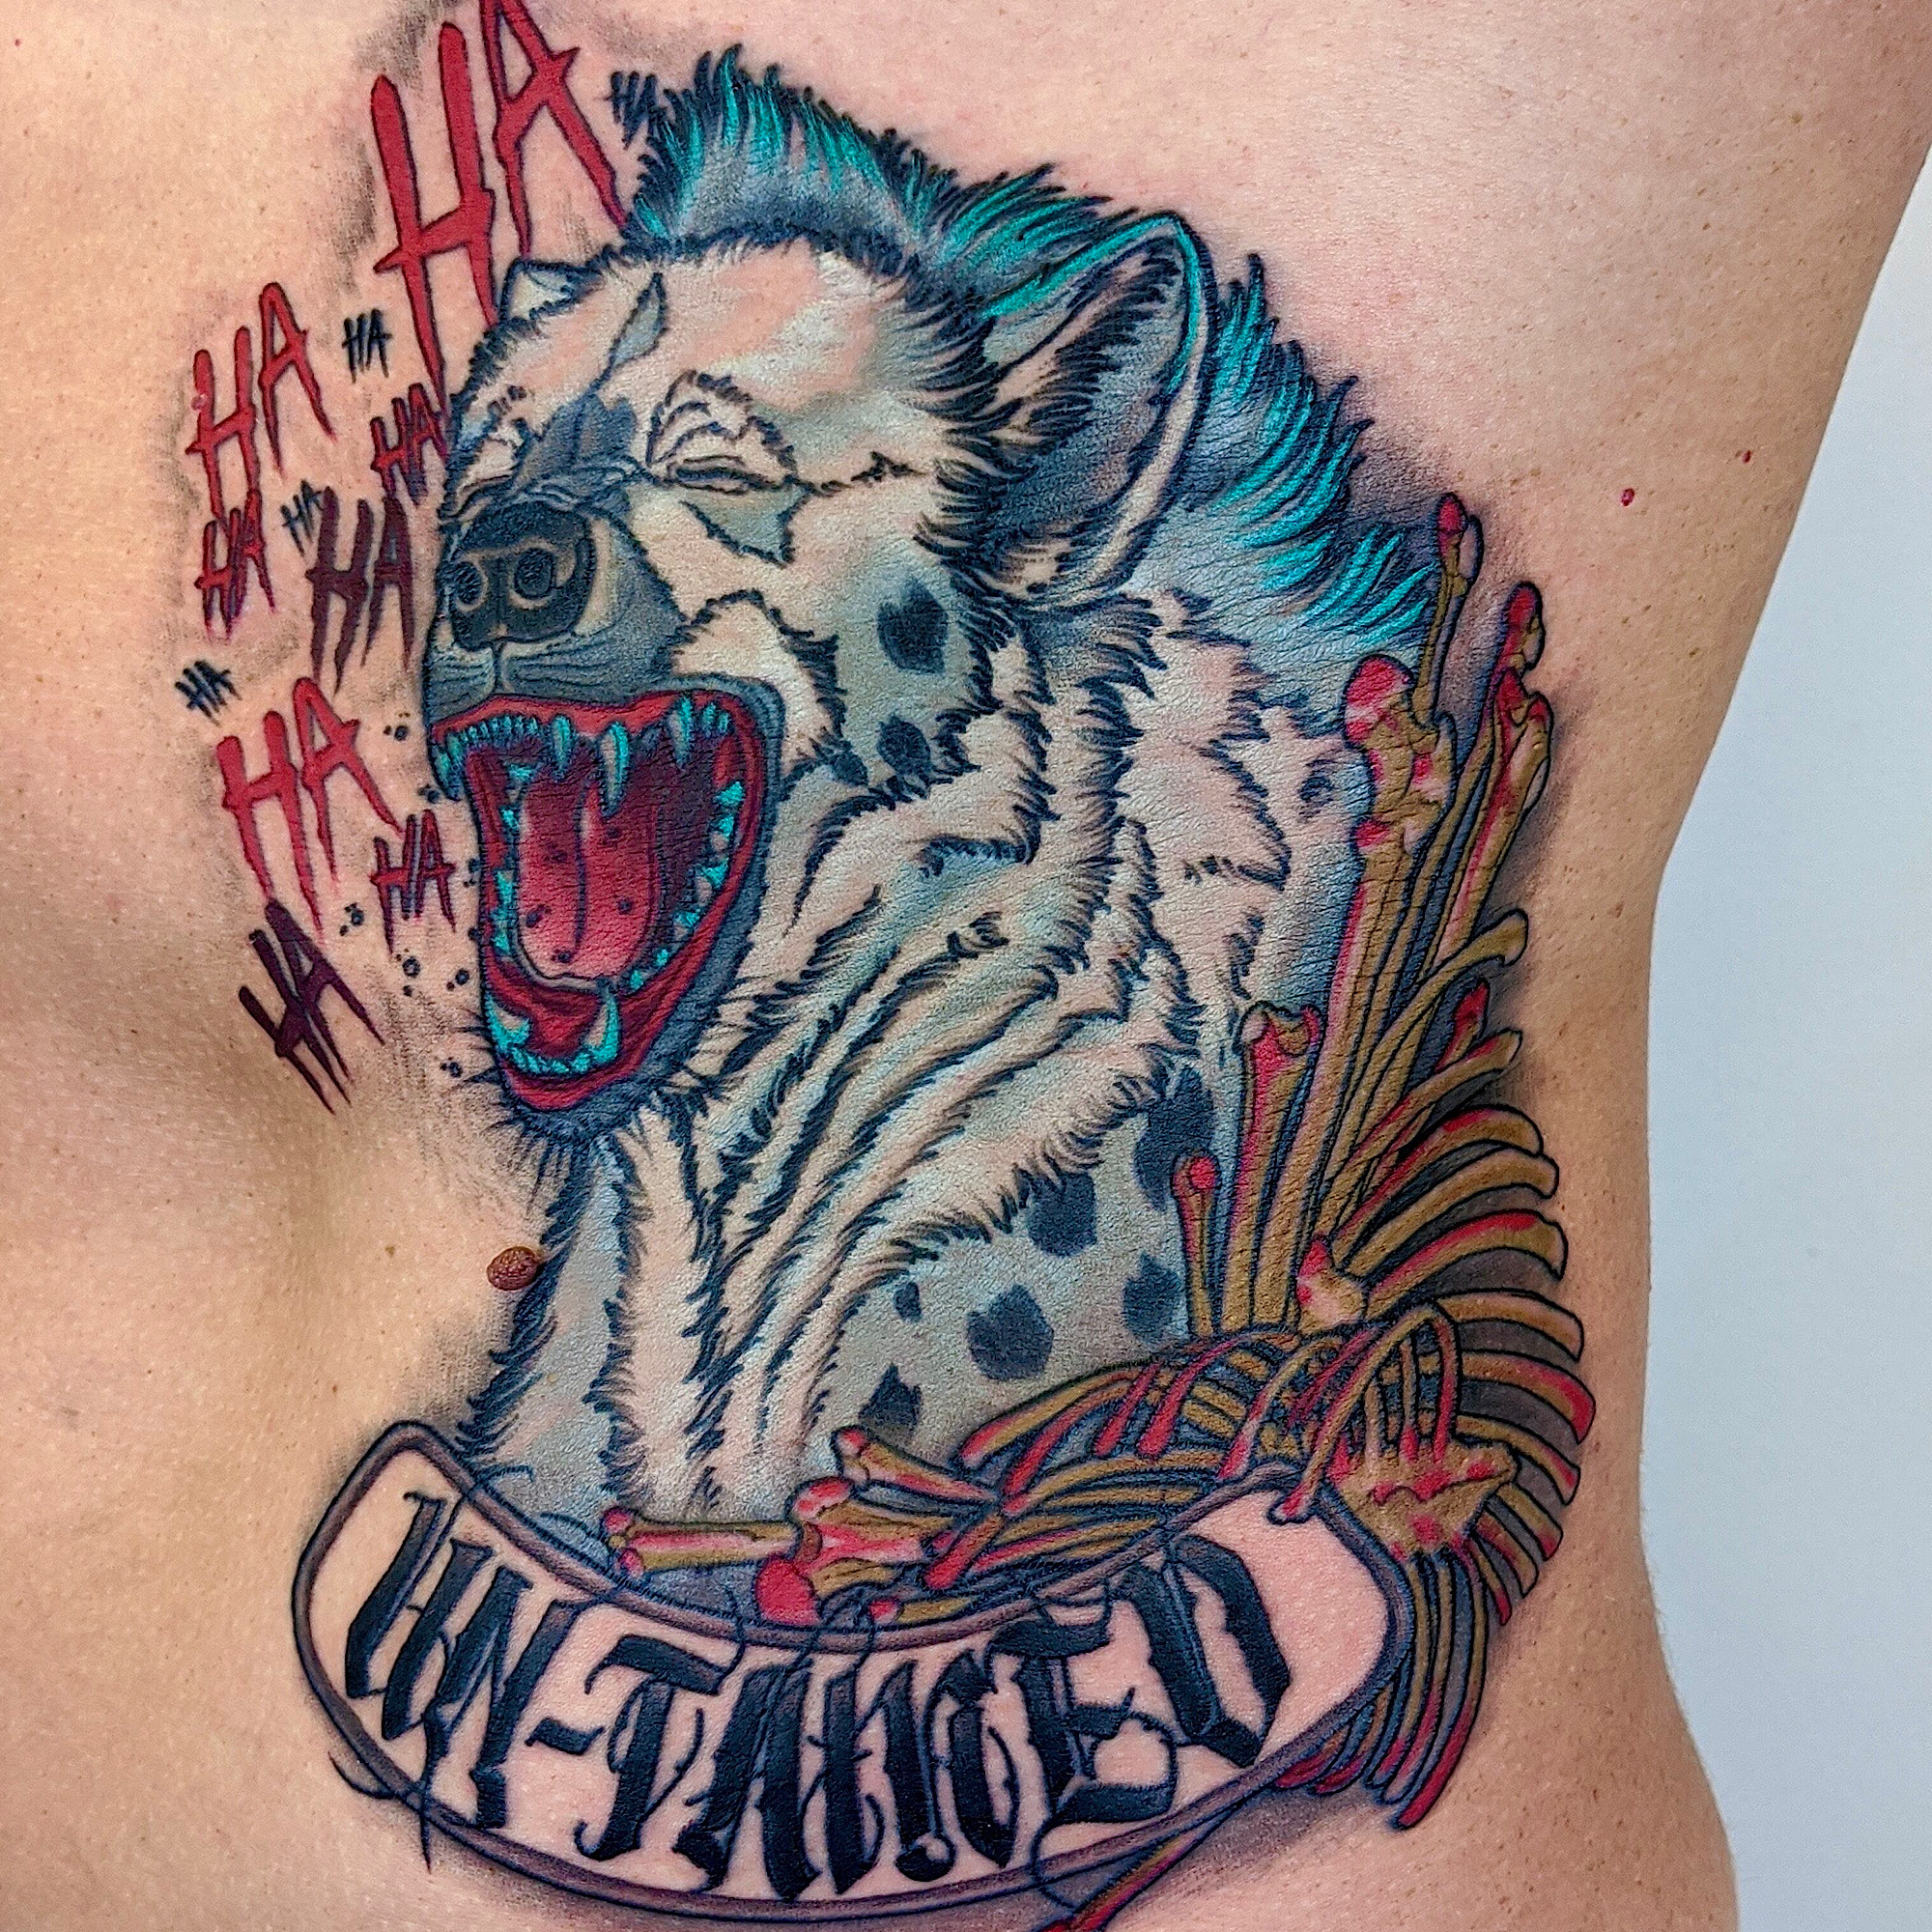 Laughing hyena with jokers hahaha neo traditional tattoo on a bed of bones with words untamed un-tamed by Ricks custom tattooing Ricardo Pedro at Nexus Collective